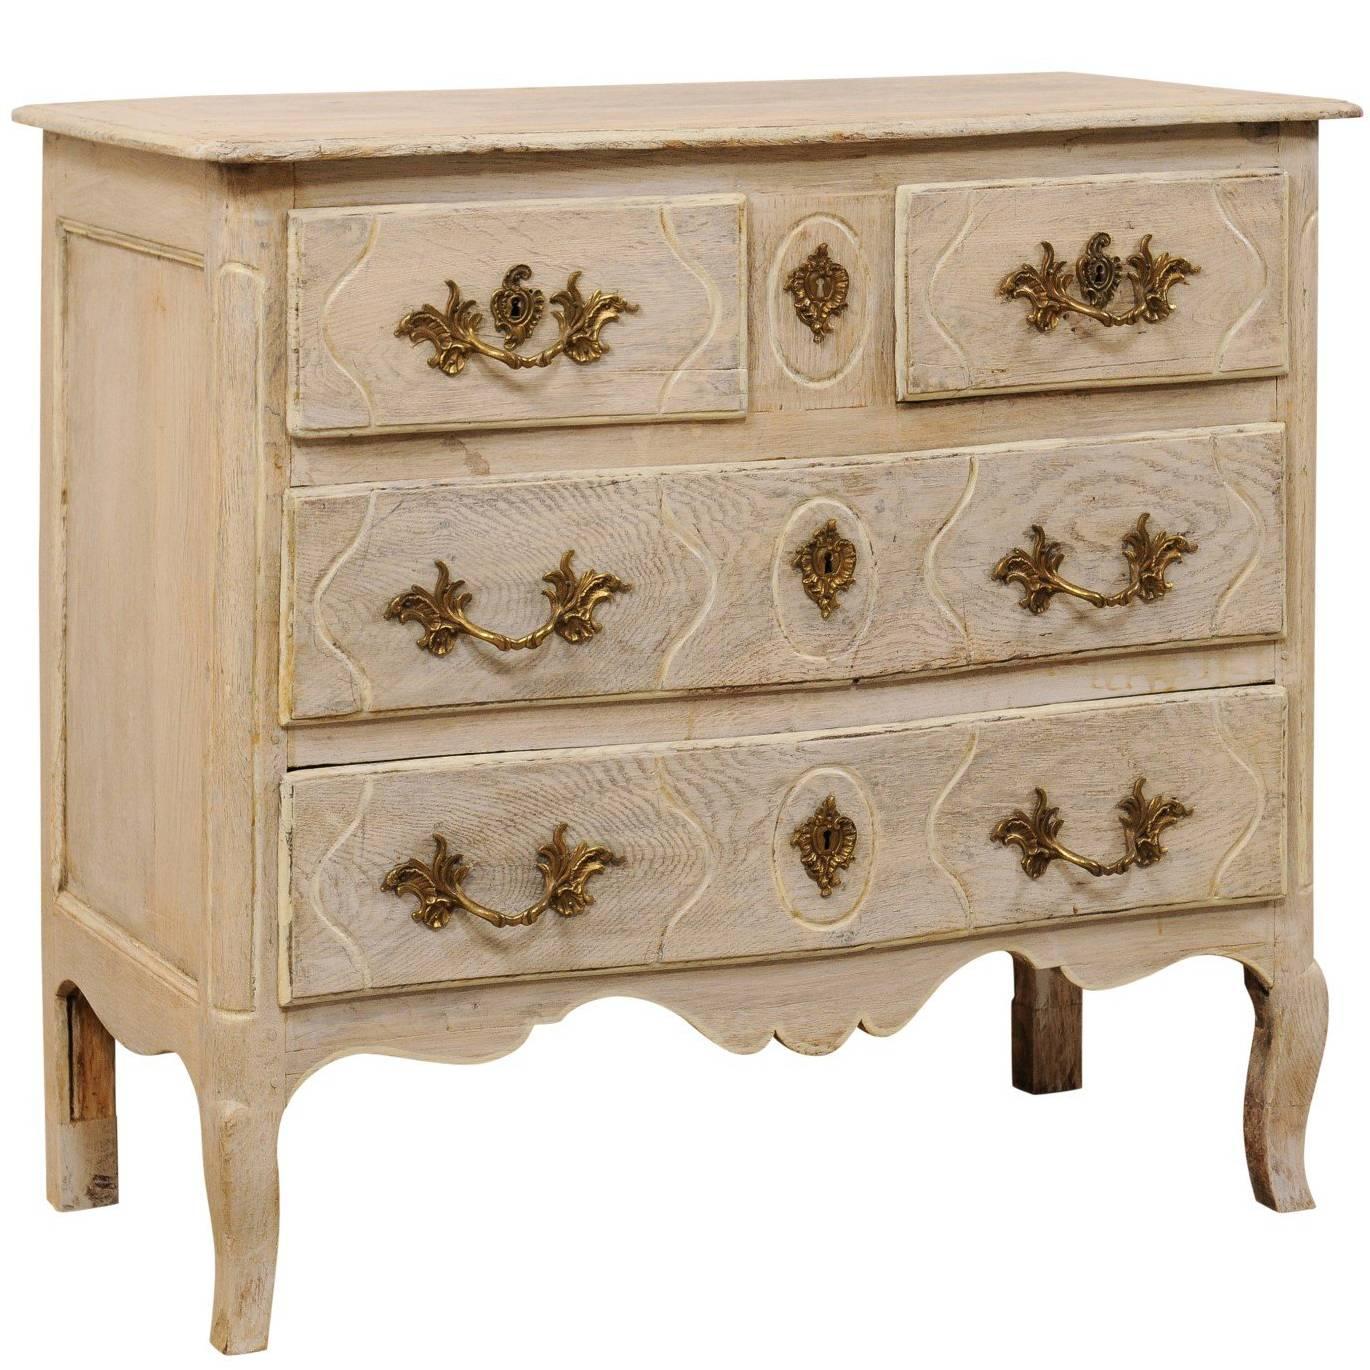 French Mid-19th Century Painted Wood Five-Drawer Chest